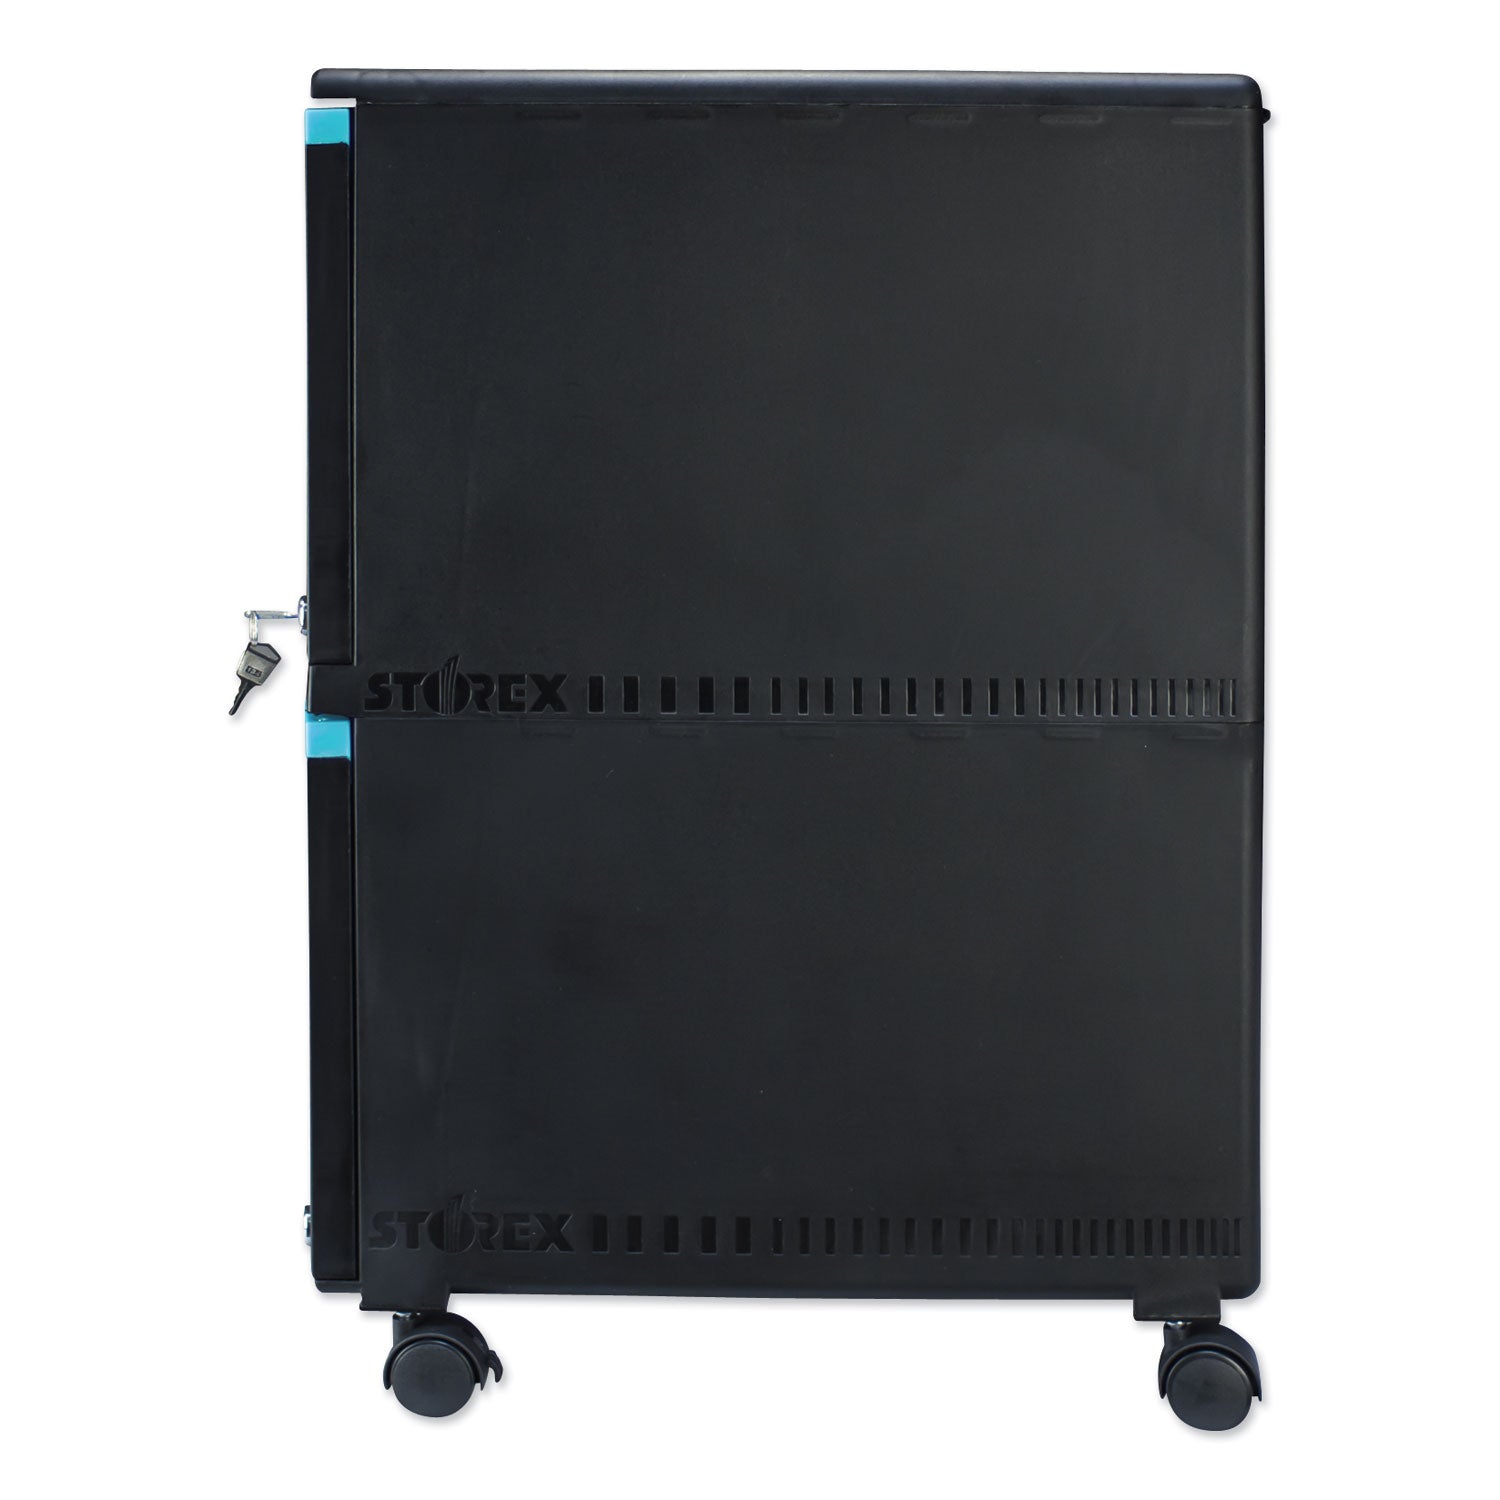 two-drawer-mobile-filing-cabinet-2-legal-letter-size-file-drawers-black-teal-1475-x-1825-x-26_stx61315u01c - 3